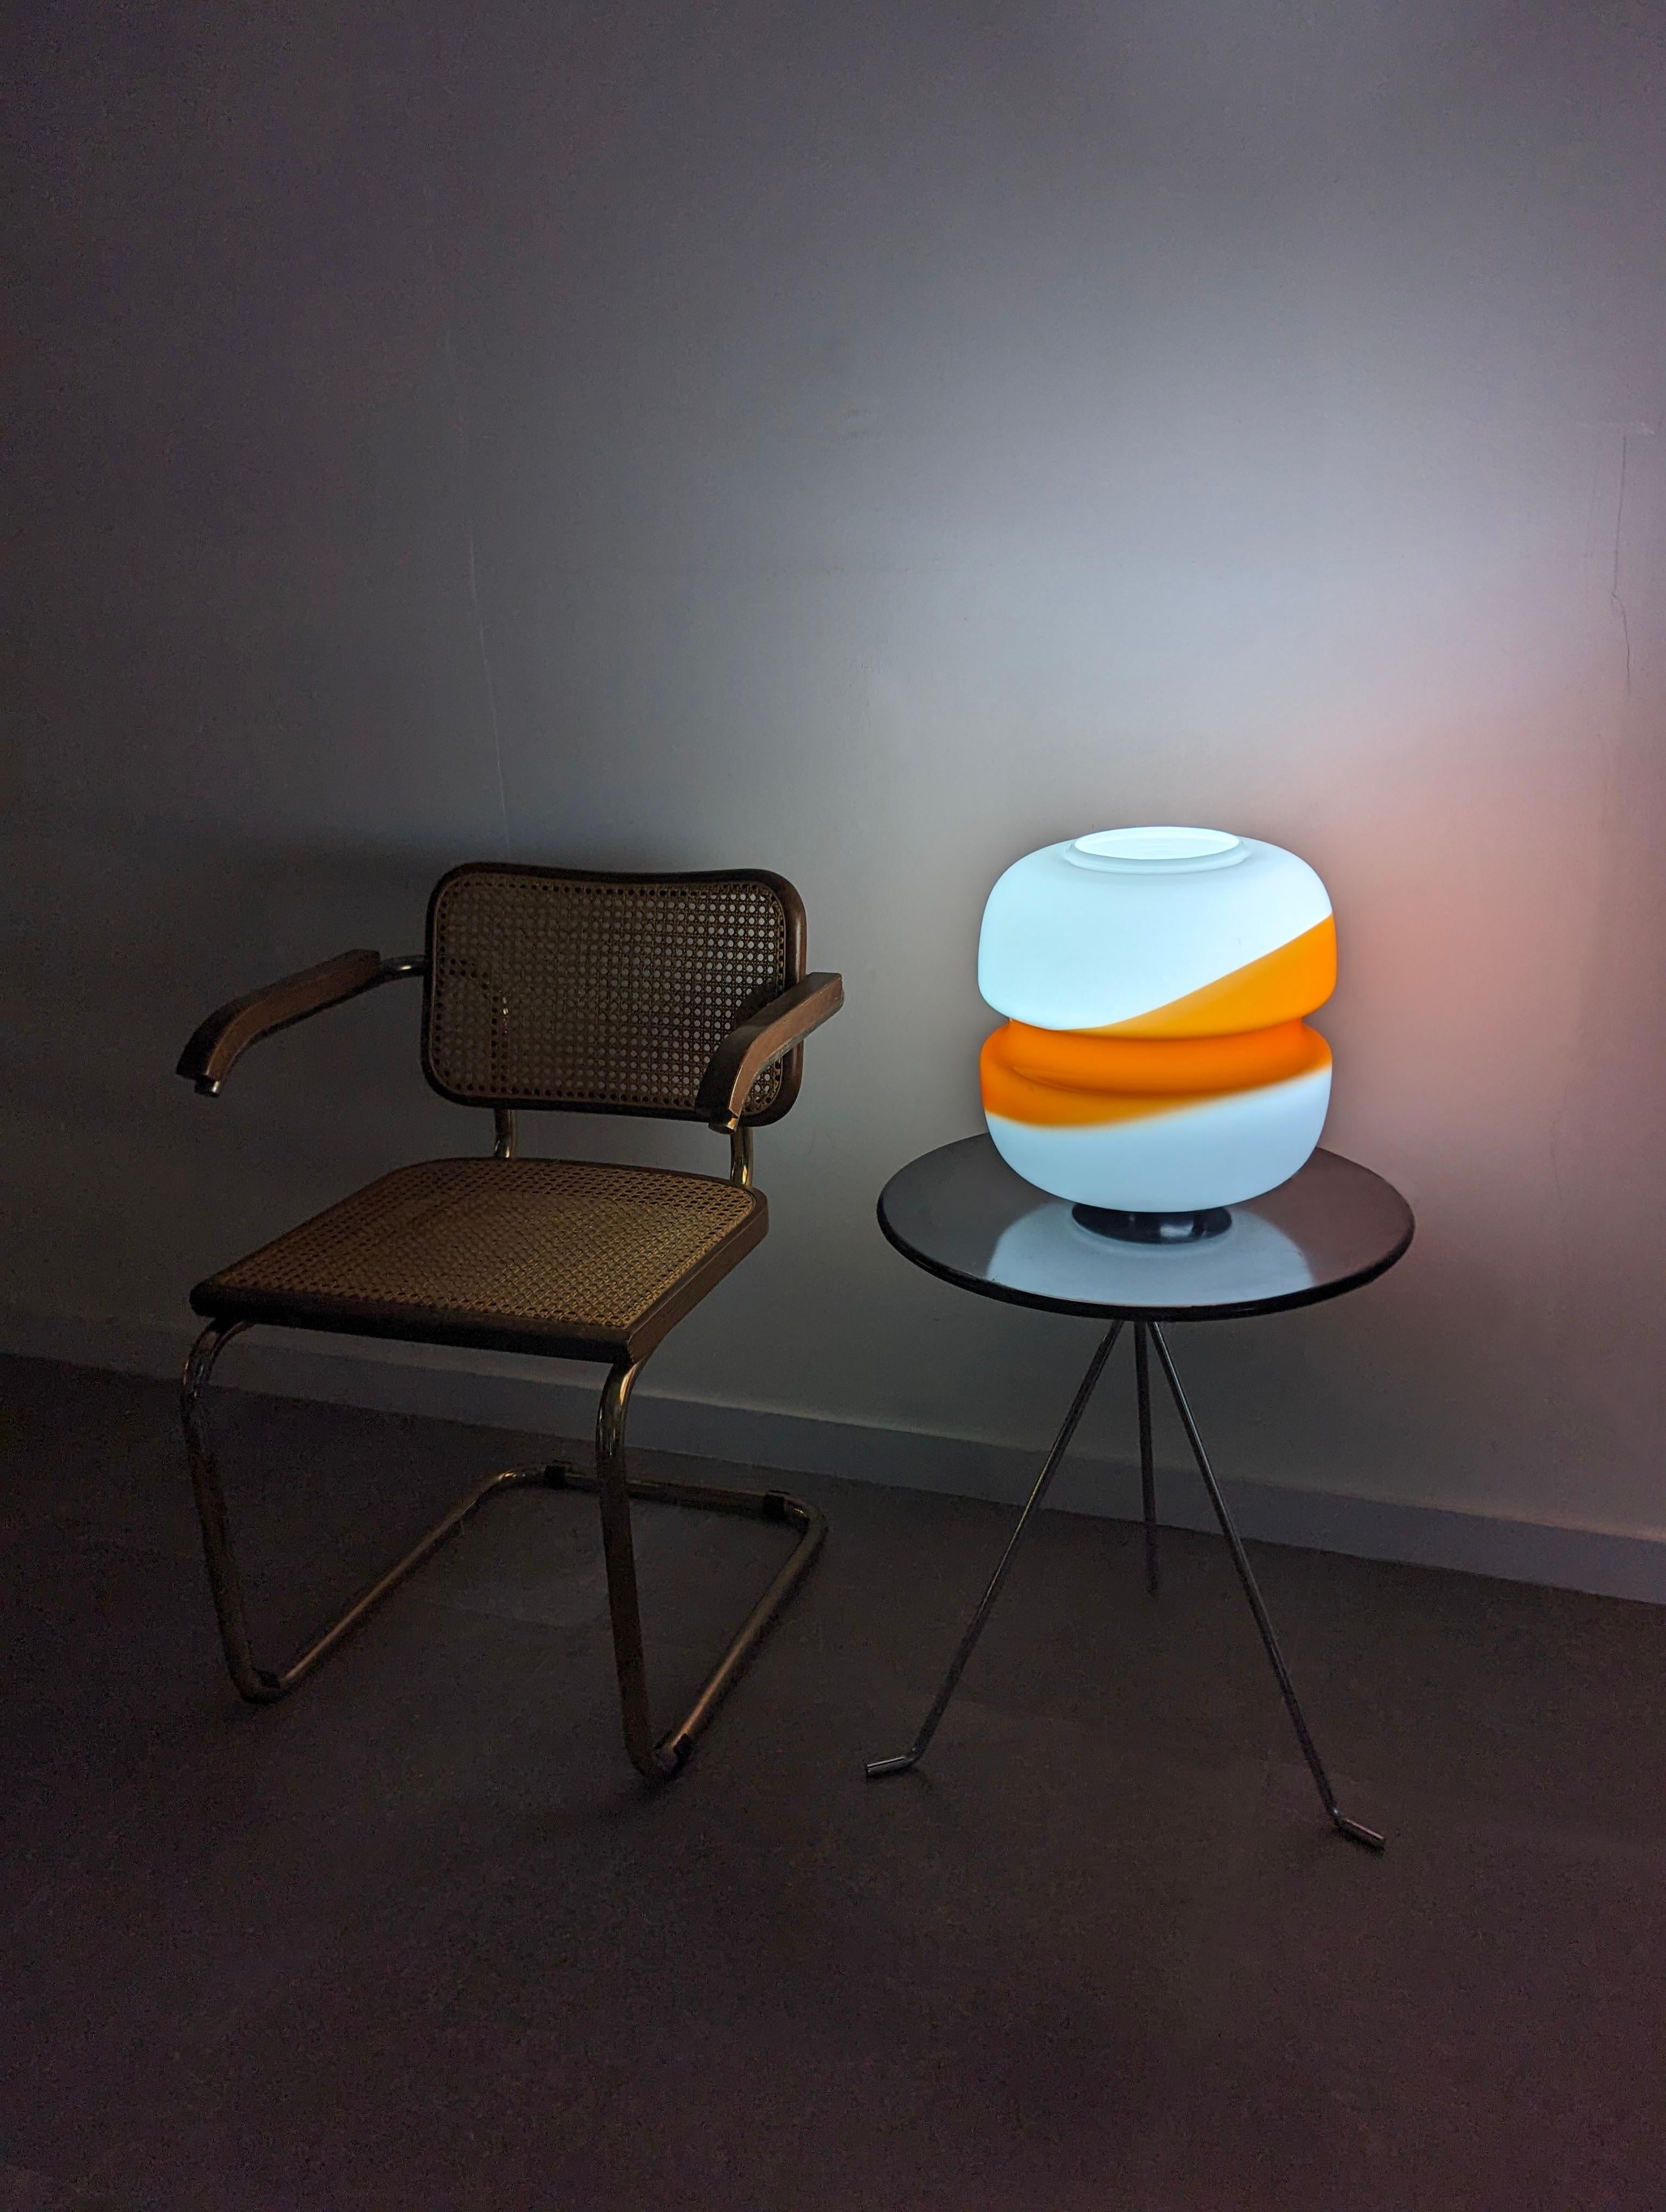 Italian table lamp by Mazzega made in the 70s in white and orange glass with a striking transversal line design. Once turned on, its colors provide a warm and elegant atmosphere.